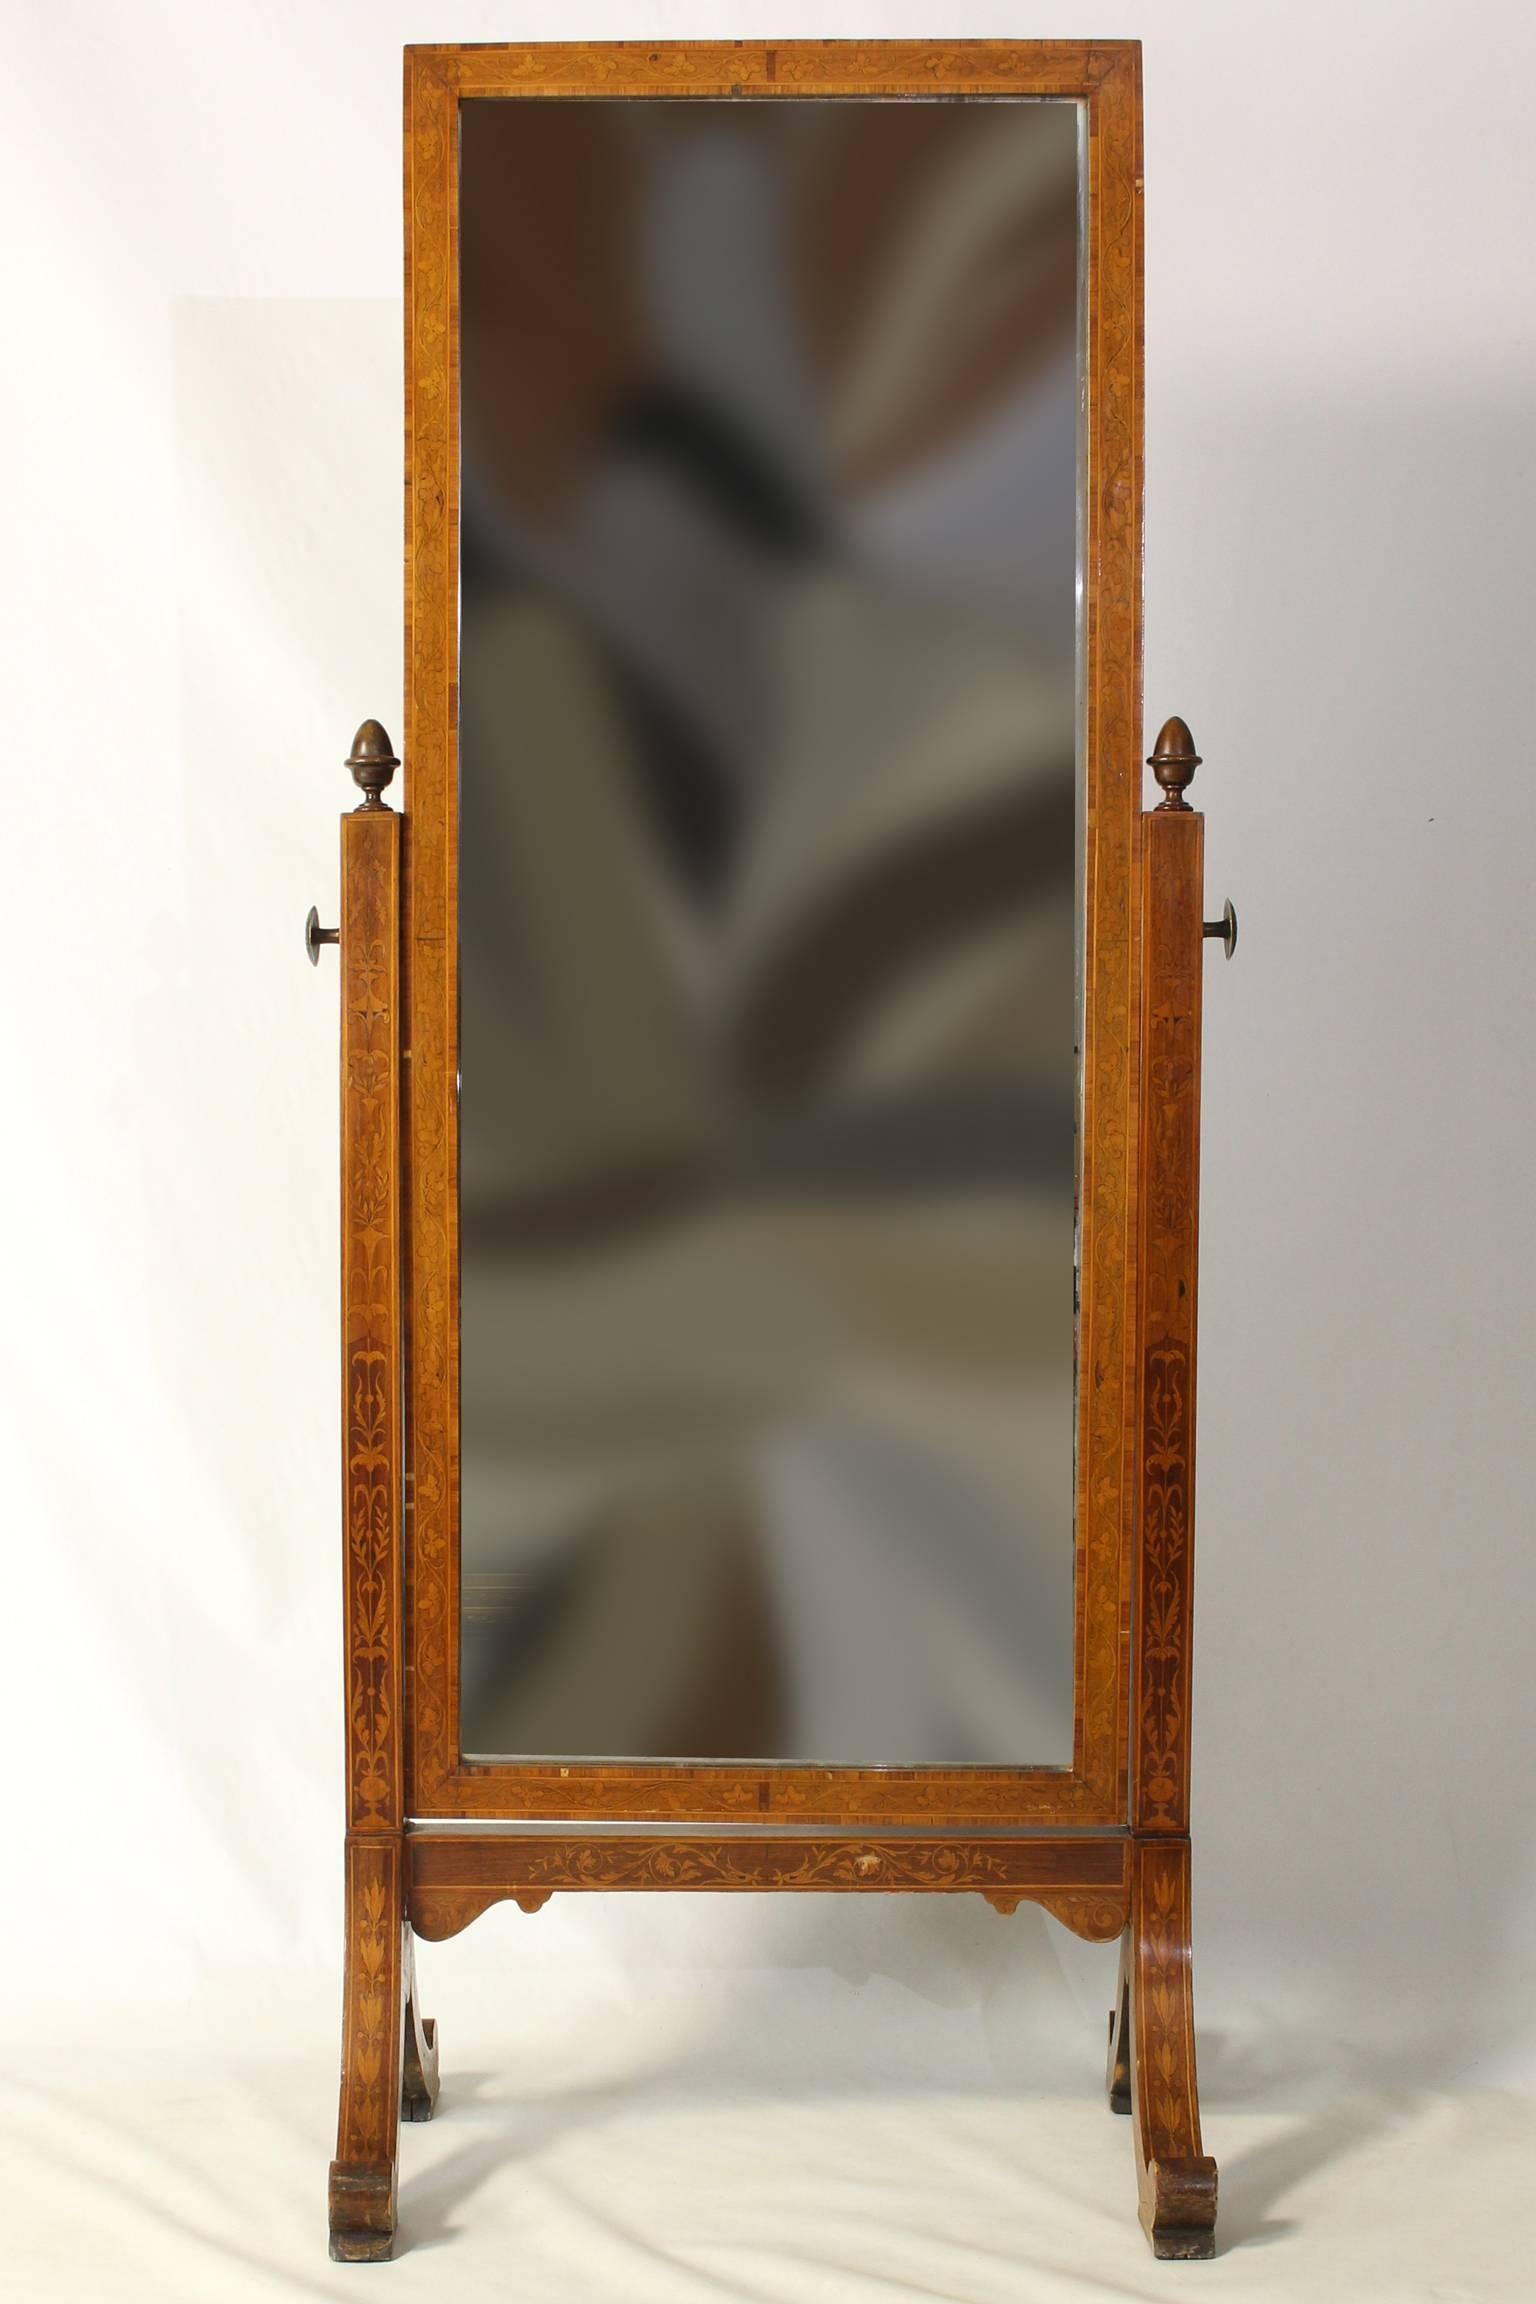 An elegant early 19th century Continental cheval mirror with foliate marquetry decoration throughout.